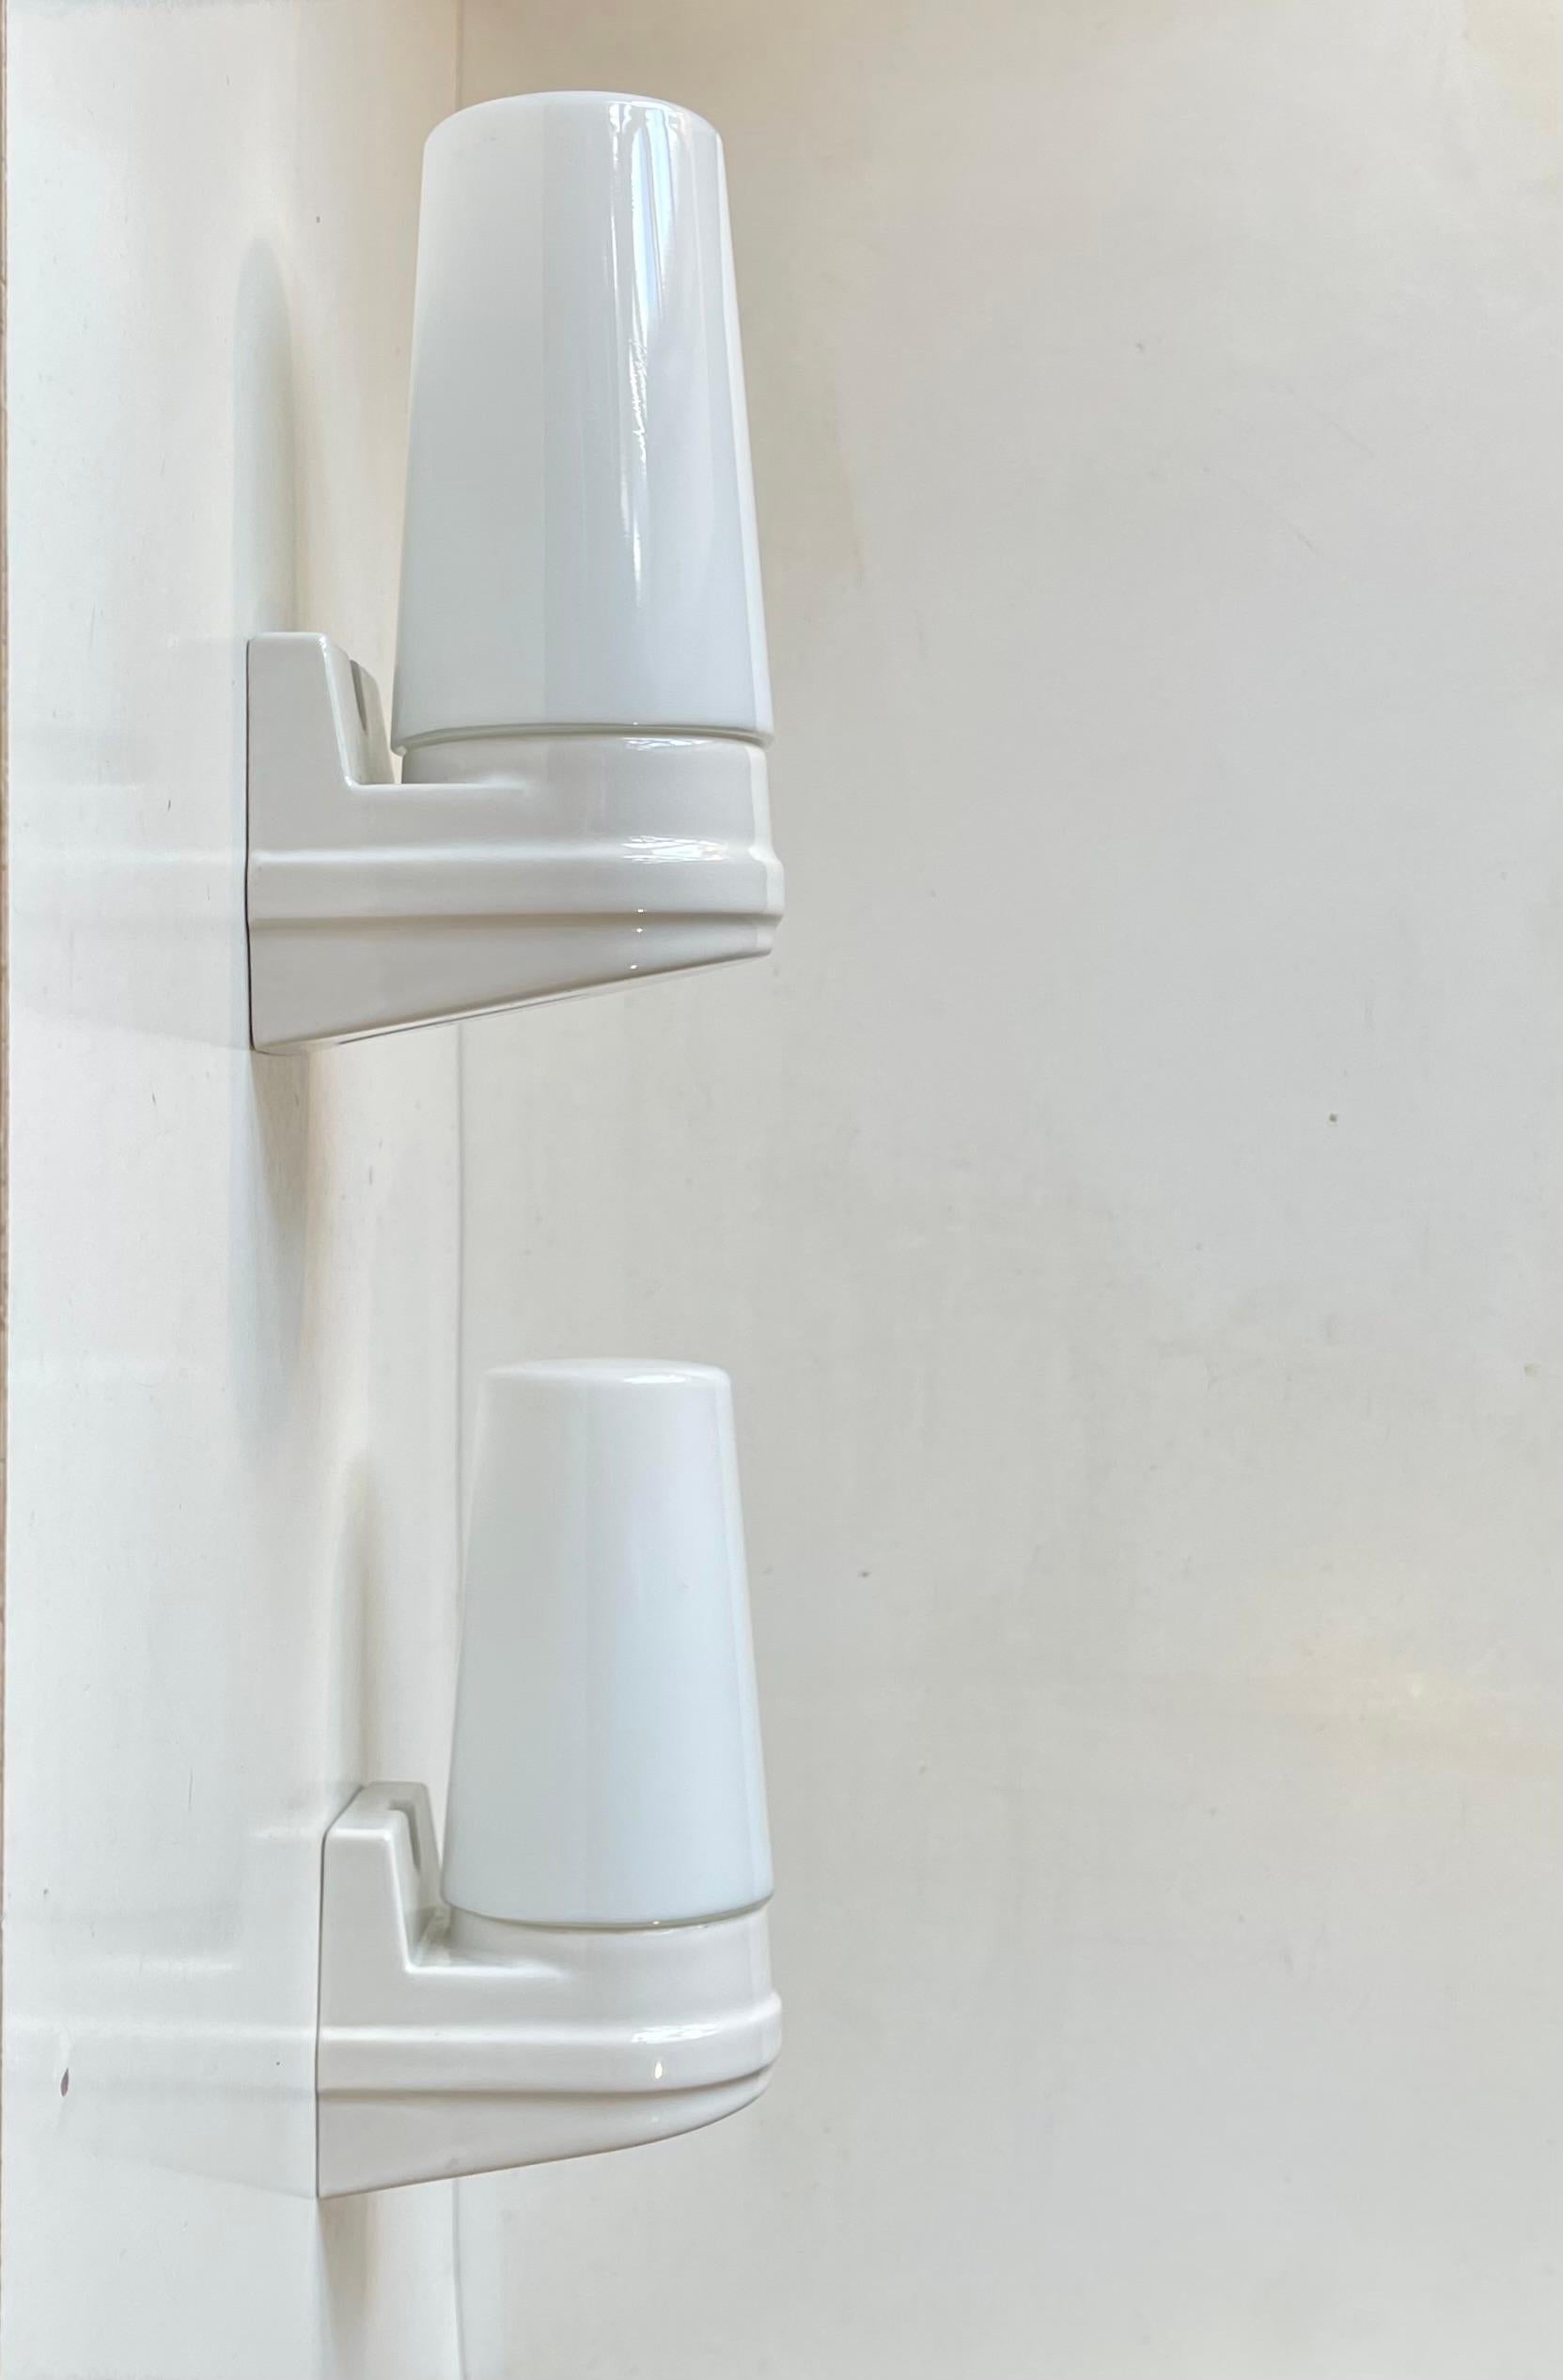 A pair of sconces suitable as bathroom or outdoor lighting. They were designed by Prince Sigvard Bernadotte for the swedish company Ifö during the 1960s. White glazed porcelain mounts with white opaline glass shading. 2 way mount - either shade